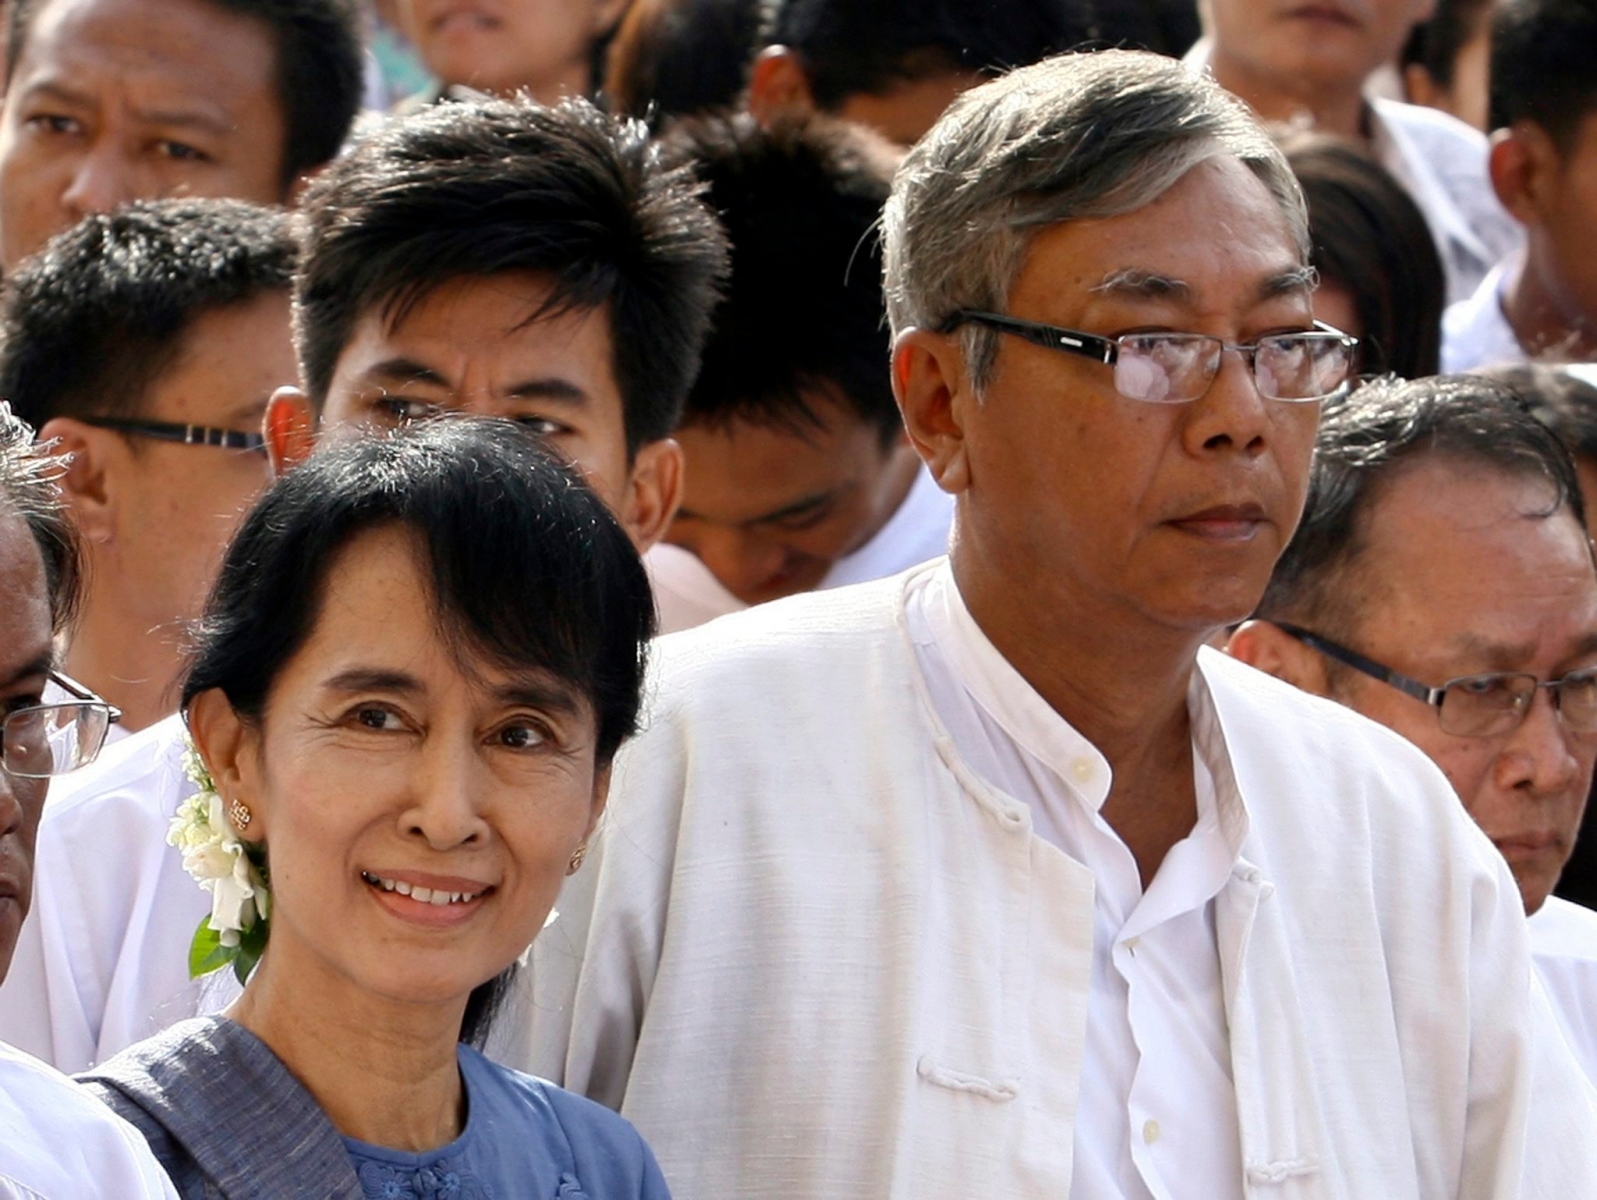 epa05203888 A picture made available on 10 March 2016 shows Htin Kyaw (R) and Myanmar democracy leader Aung San Suu Kyi (L) visit ShweMawDaw pagoda in Bago, Myanmar, 14 August 2011. Myanmar's National League for Democracy party put forward its nominations for president on 10 March 2016, four months after a landslide election victory, and confirming that its leader Aung San Suu Kyi will not hold the post. A close advisor to Suu Kyi, Htin Kyaw, is the NLD's nominee from the lower house (Pyithu Hluttaw), making him a favorite to become president in a vote expected next week. He is the son of a prominent poet, as well as being Suu Kyi's former classmate and chauffeur, and had been widely tipped as a candidate for the top post  EPA/NYEIN CHAN NAING MYANMAR PRESIDENT NOMINATION